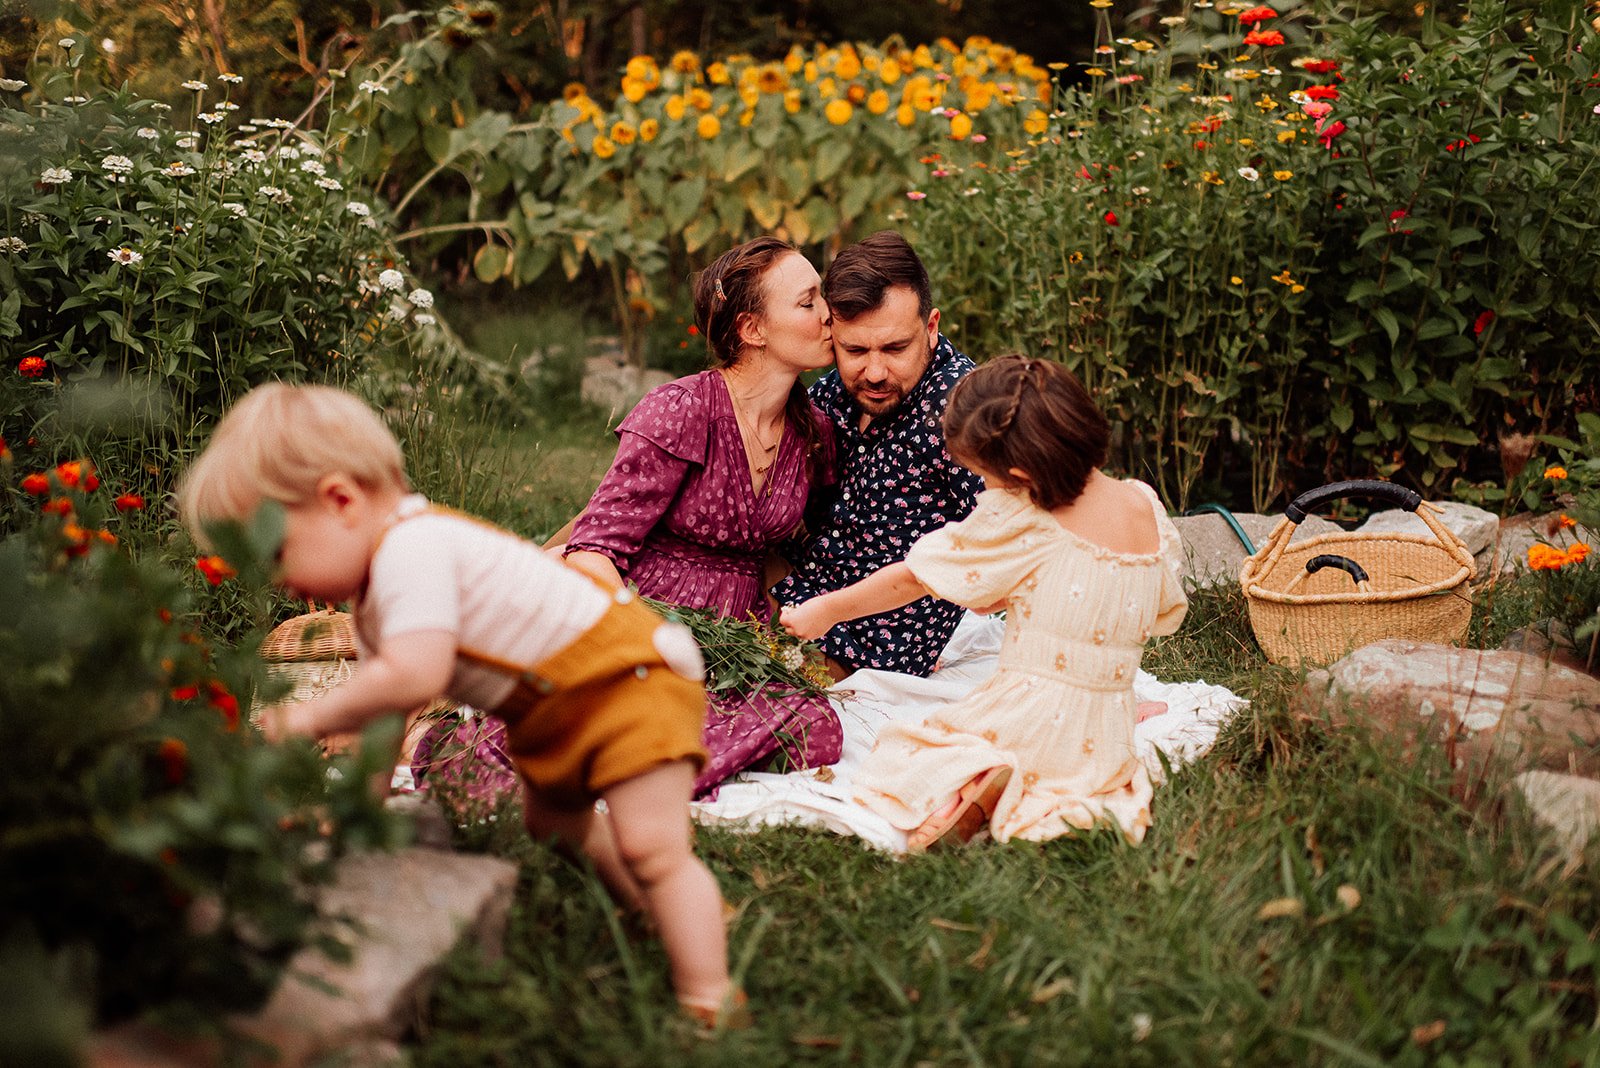 State College Family Portraits, Family Lifestyle Shoot, Savita Sittler Photography